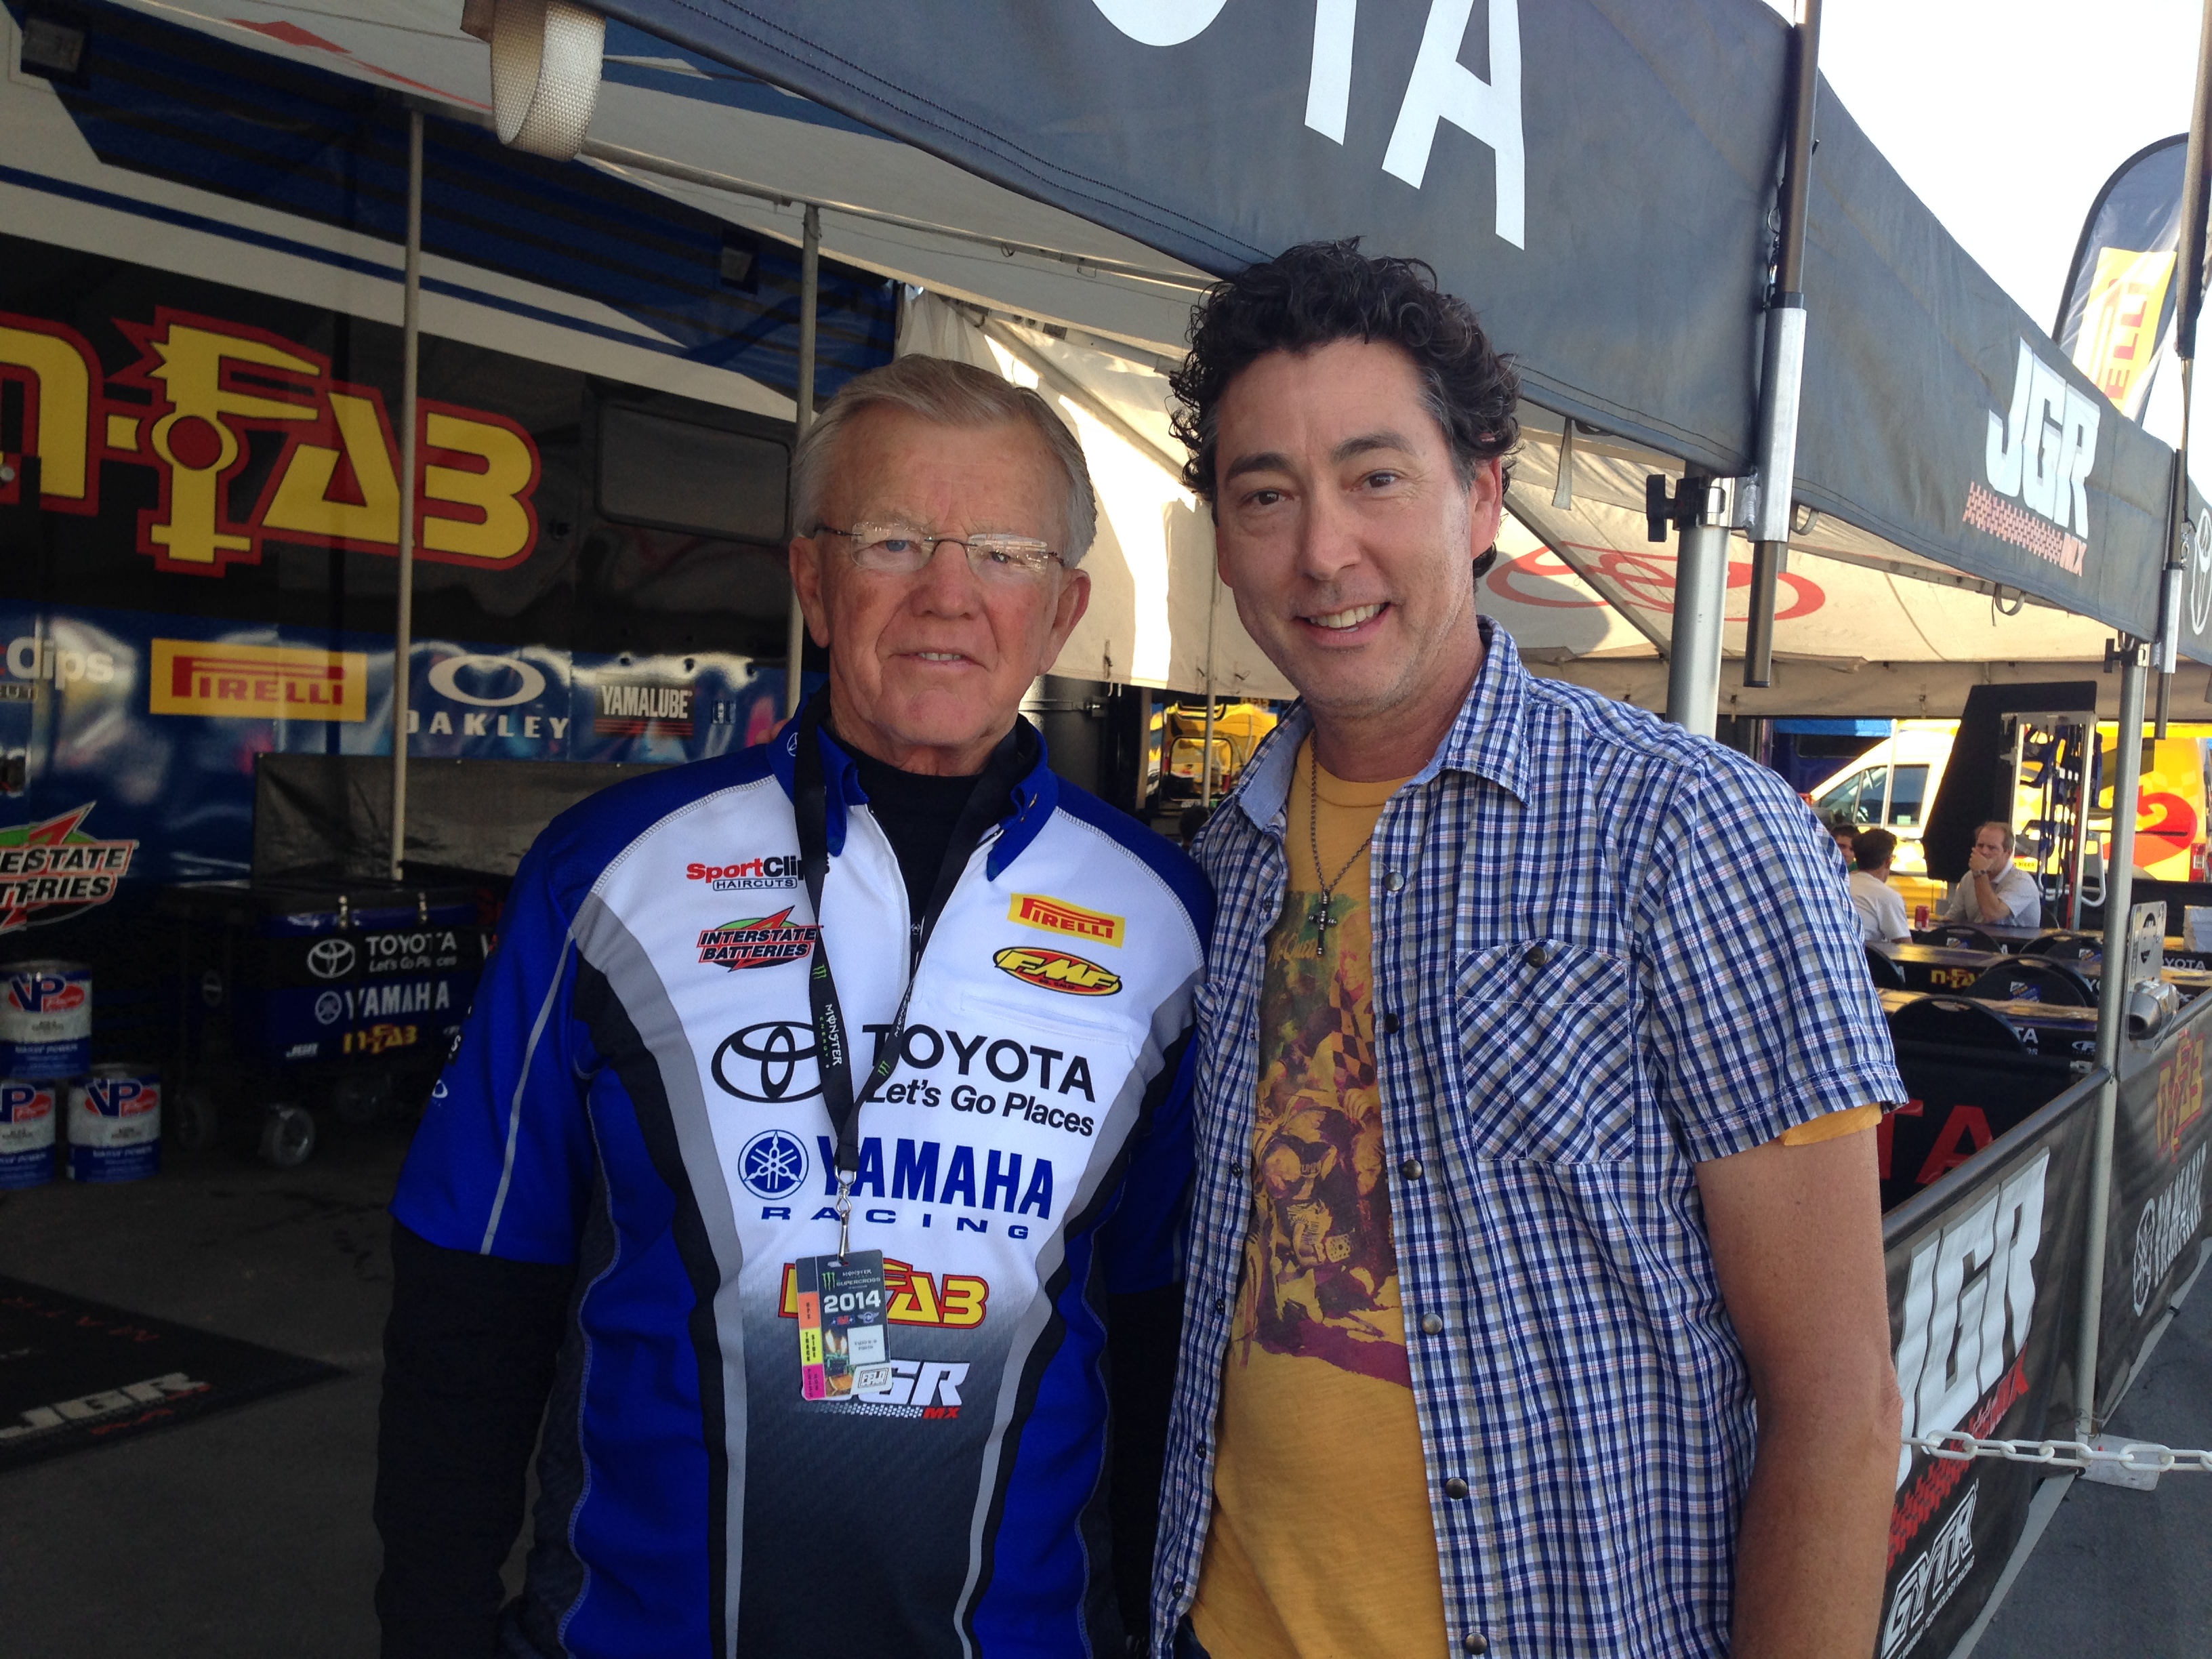 The one and only Joe Gibbs at Anaheim Supercross!